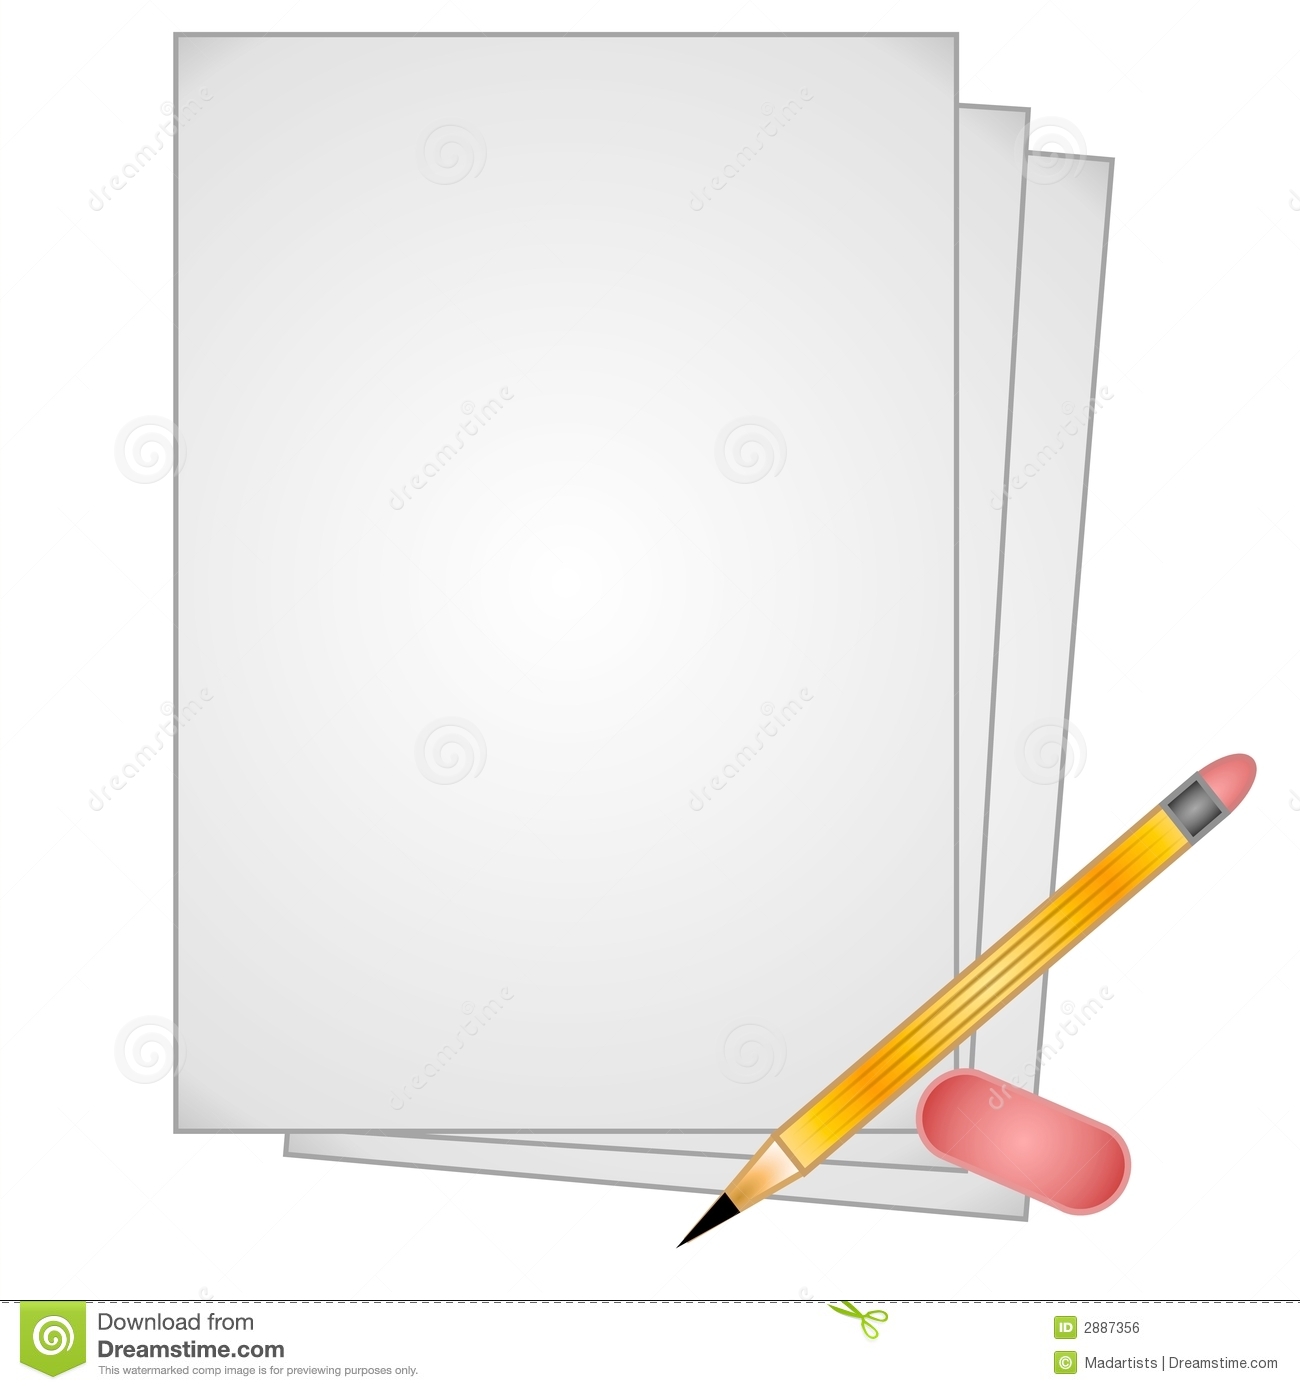 Simple Clip Art Illustration Of A Few Pieces Of Paper Pencil And An